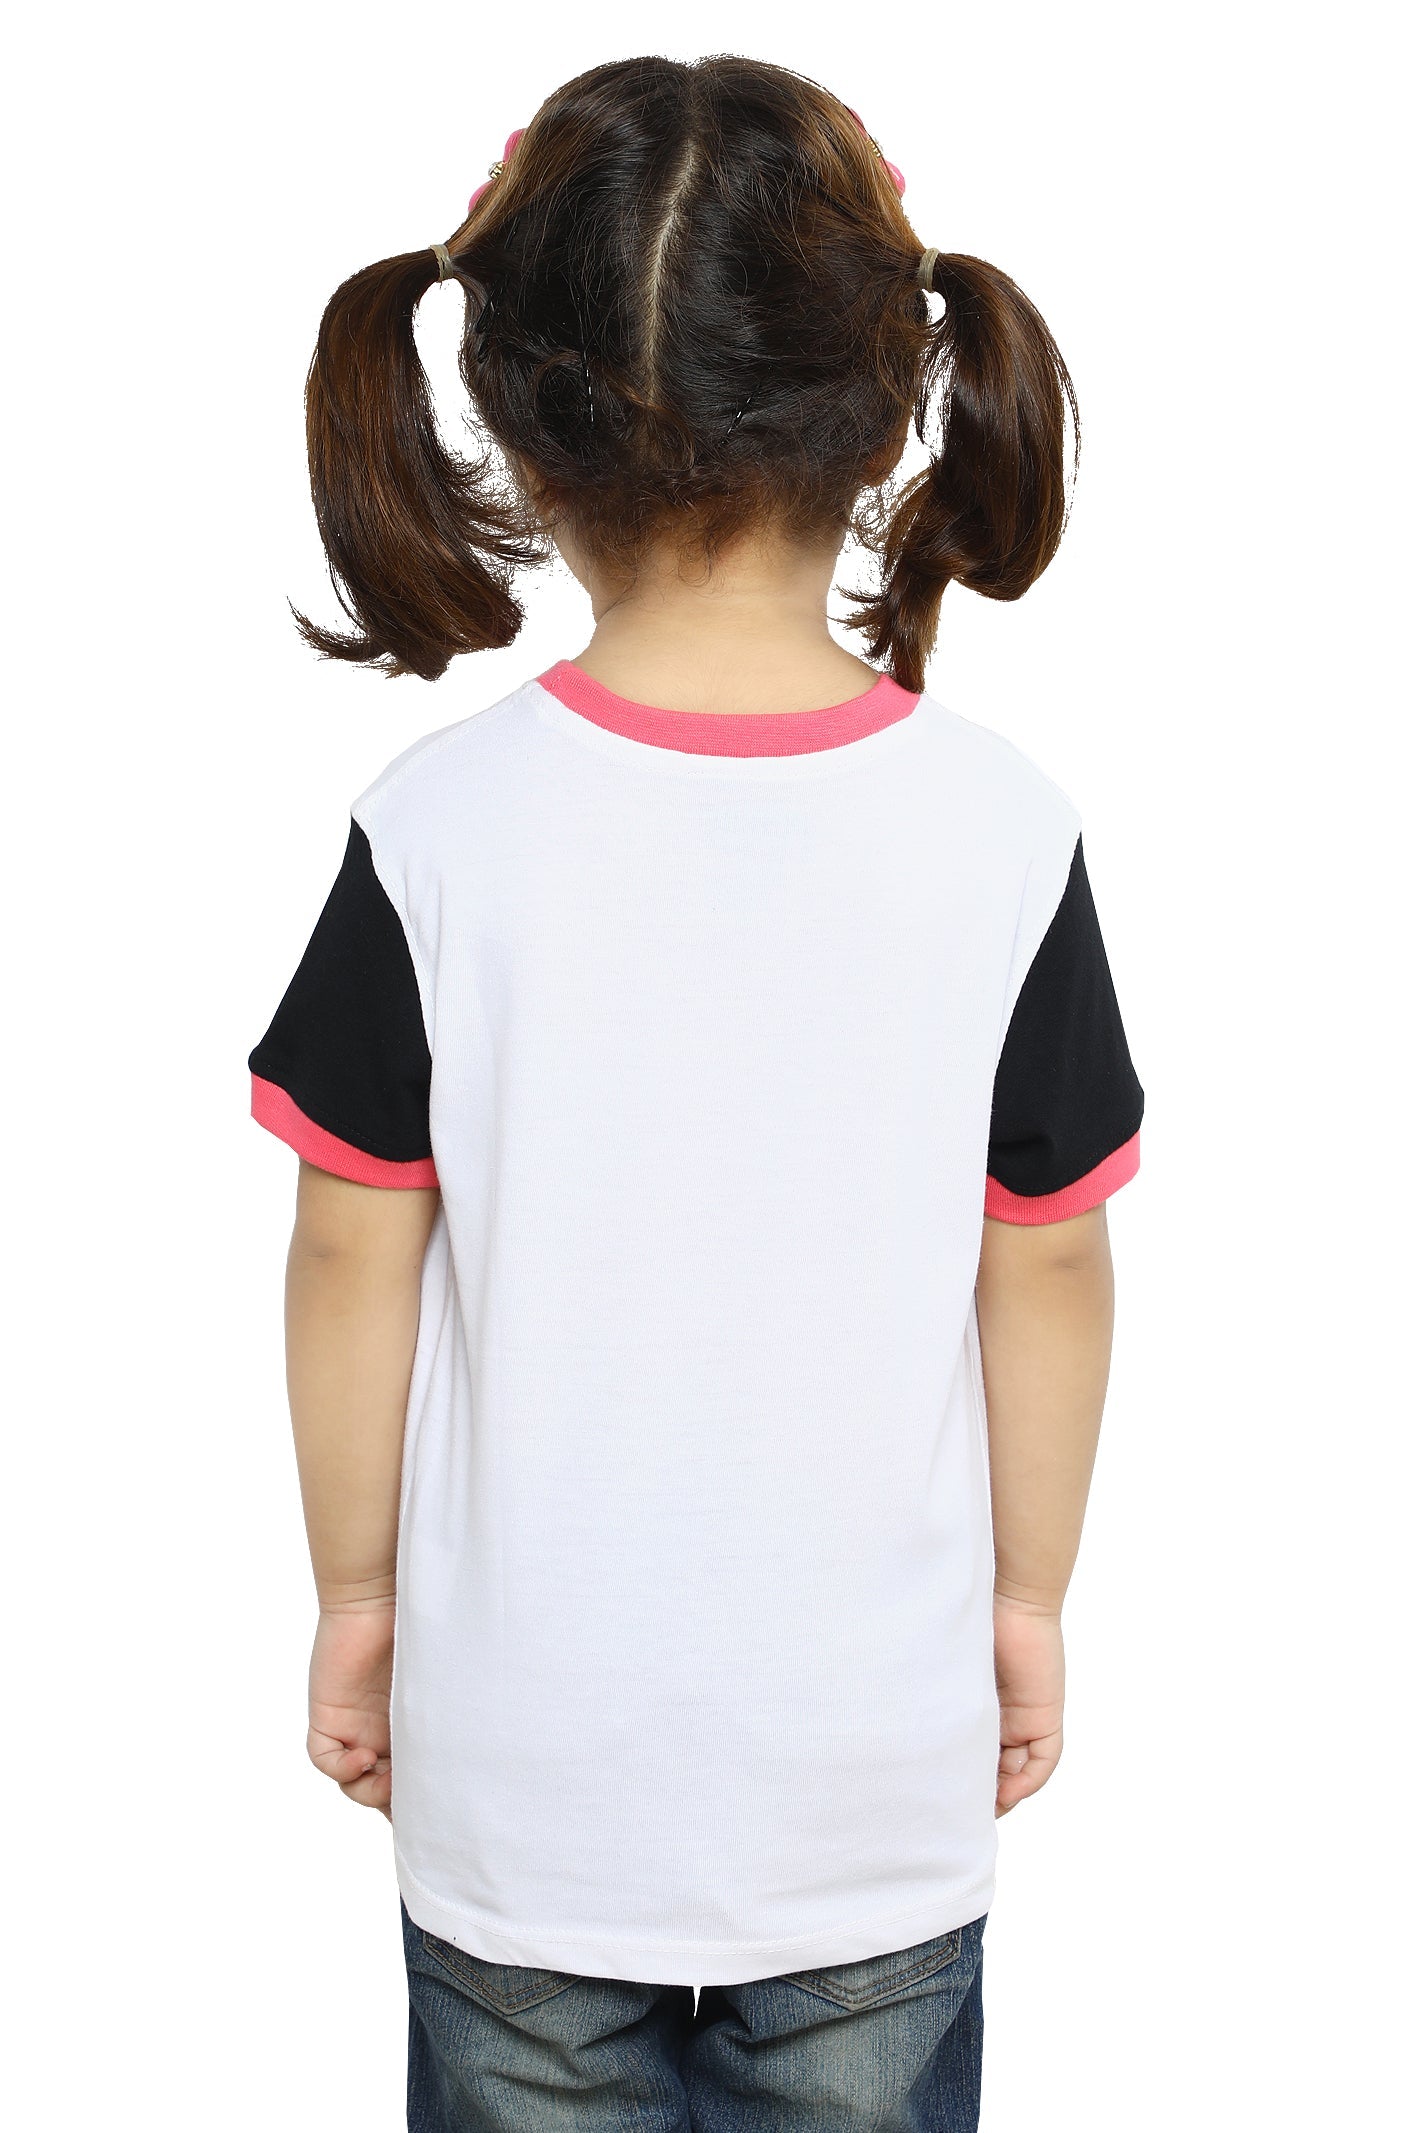 Girls T-Shirt In White - Diners